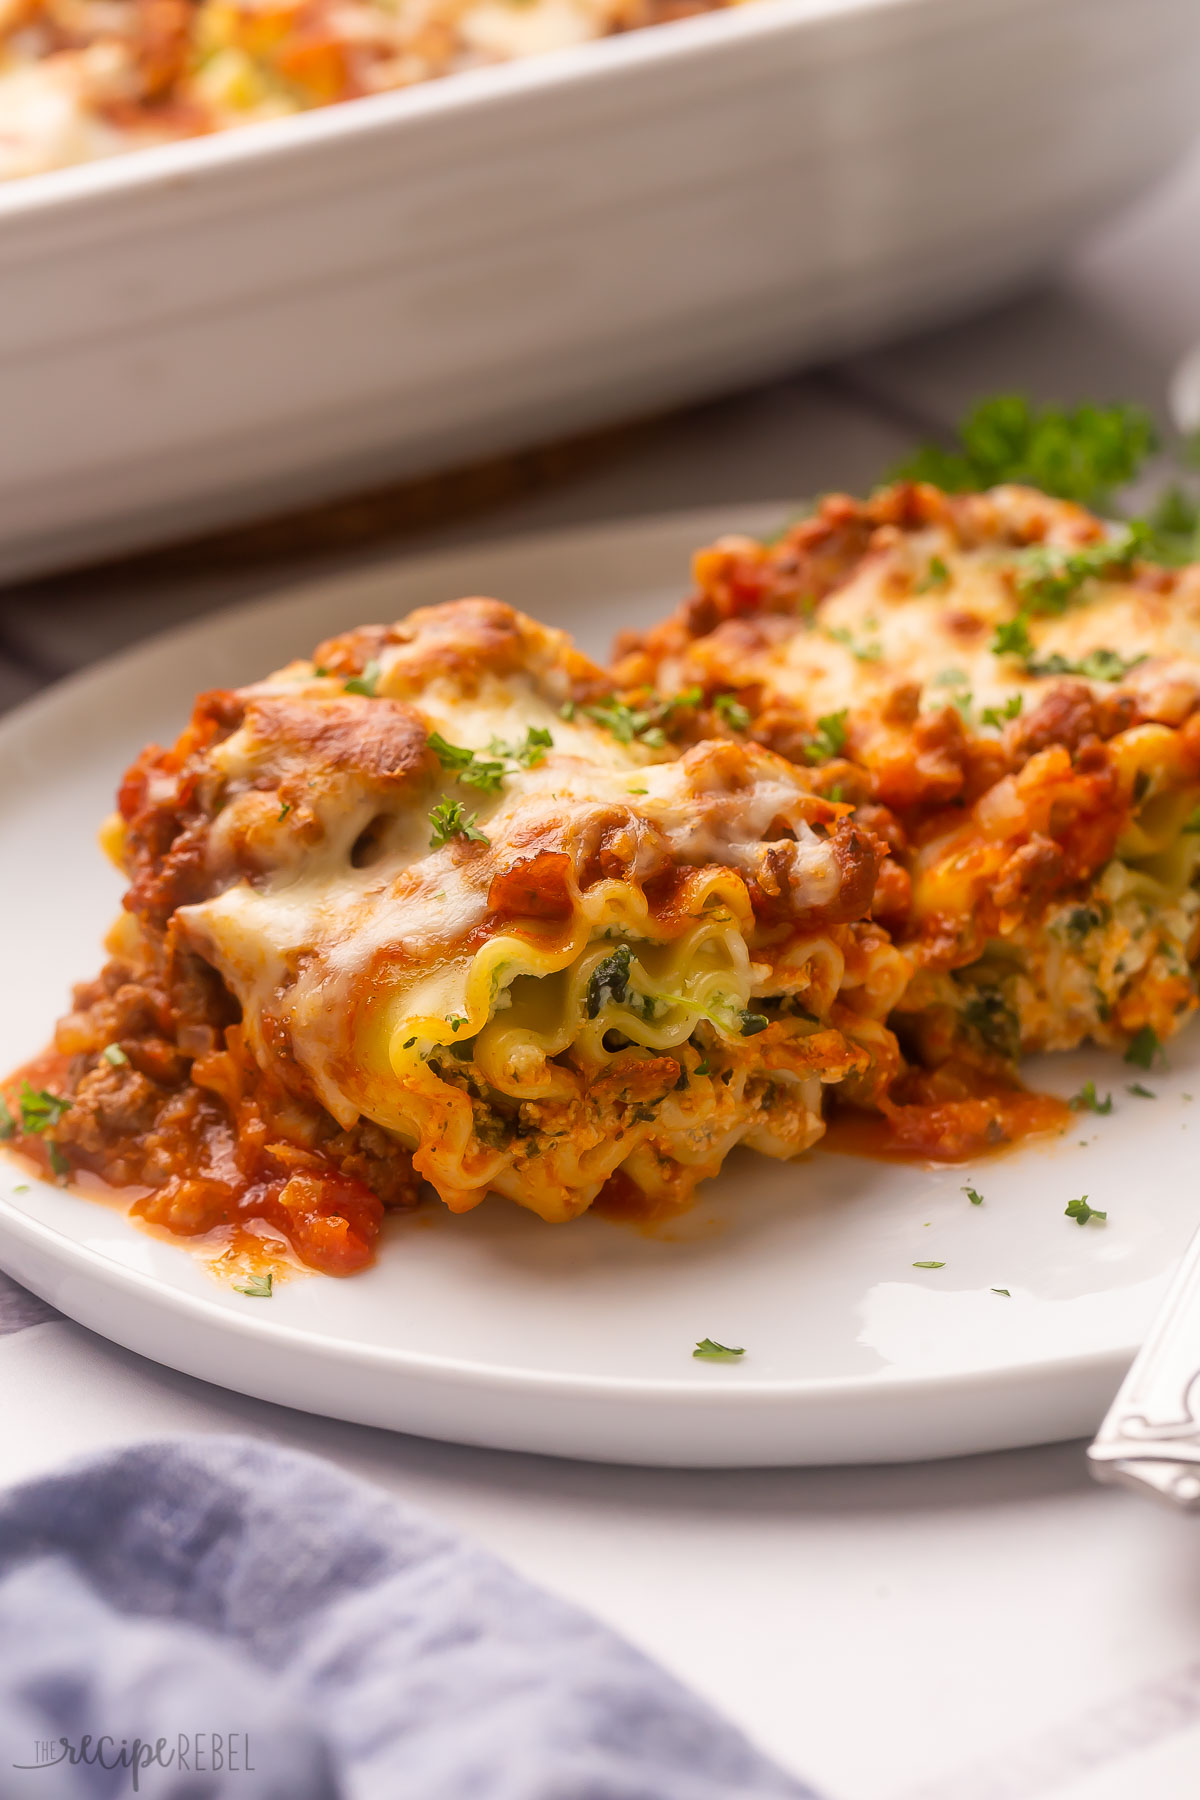 two pieces of lasagna roll ups on a white plate garnished with parsley.